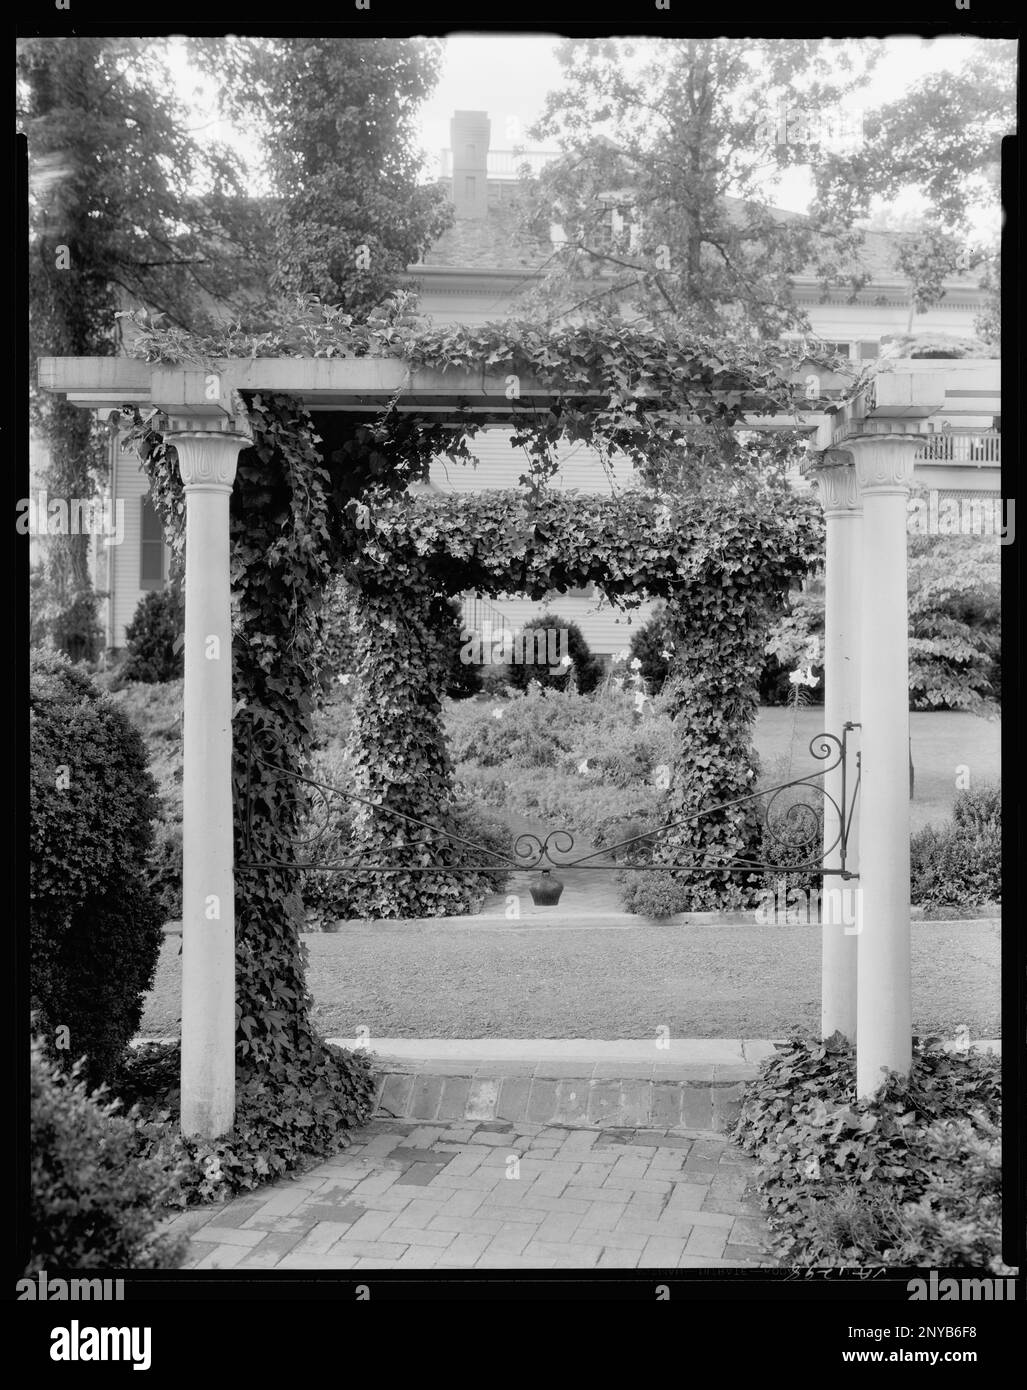 Rose Hill, Greenwood, Albemarle County, Virginia. Carnegie Survey of the Architecture of the South. United States  Virginia  Albemarle County  Greenwood, Arbors , Bowers, Gardens. Stock Photo